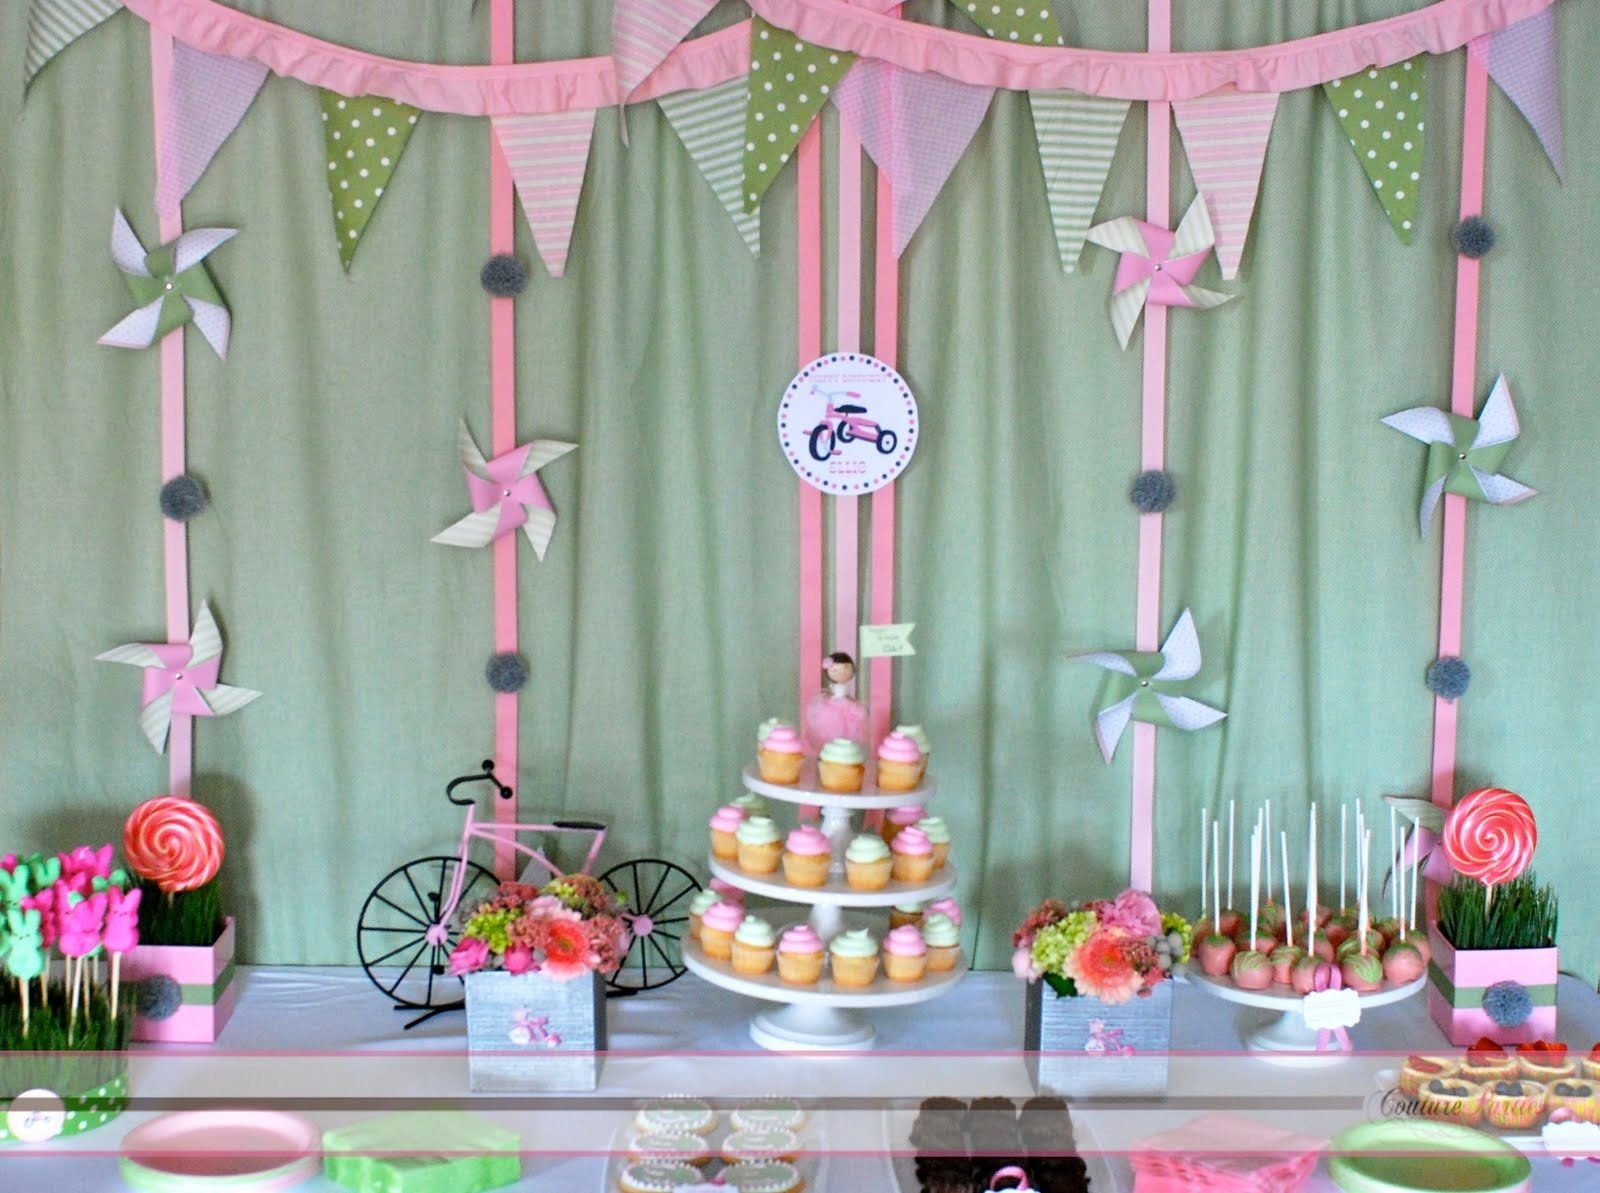 10 Most Popular Ideas For Girl Birthday Party 50 birthday party themes for girls i heart nap time 8 2022